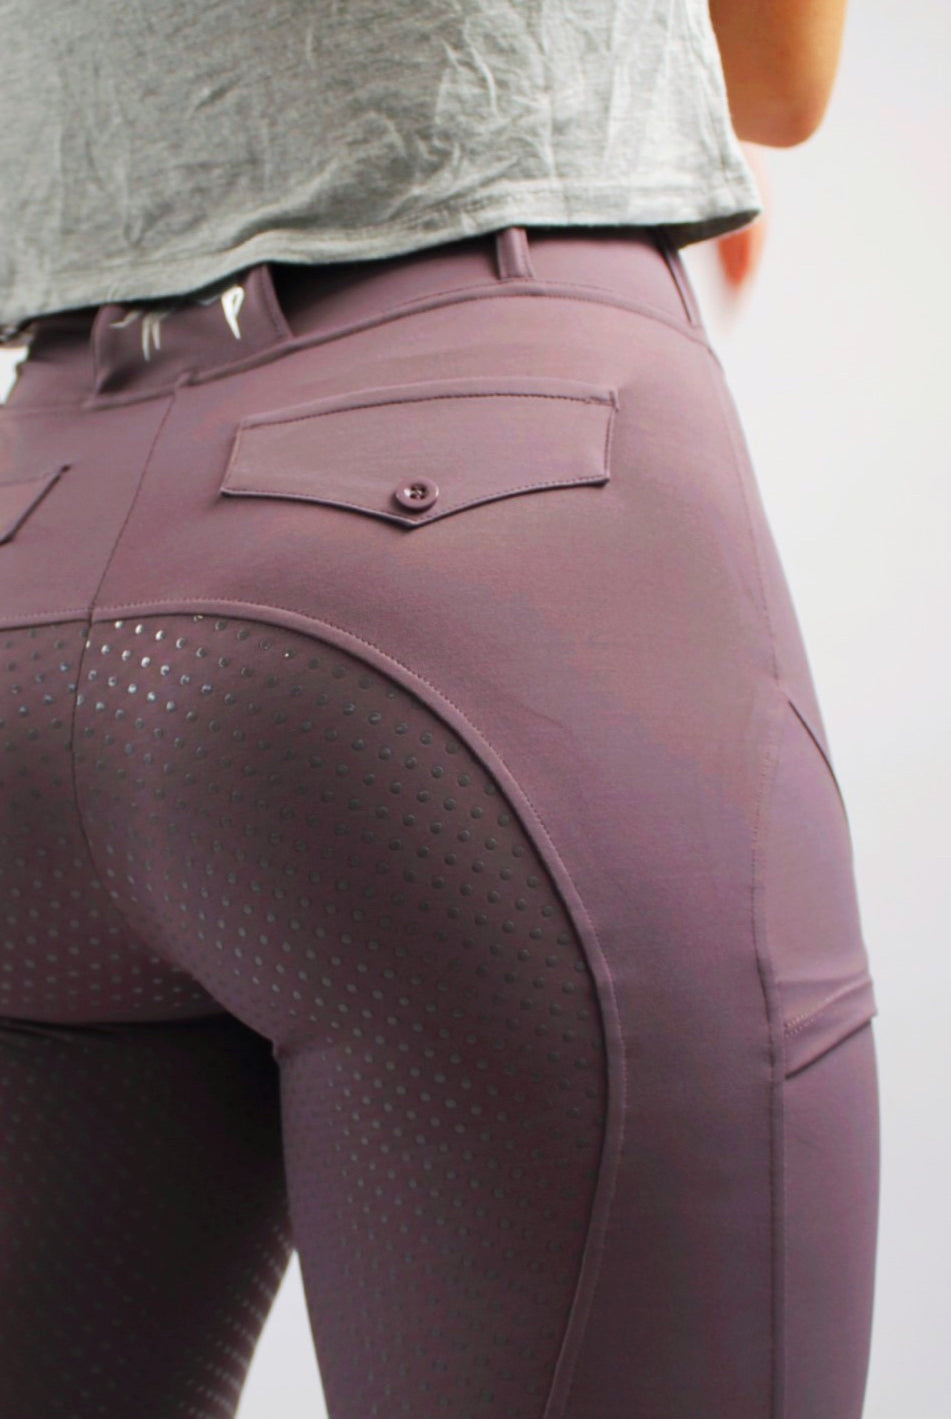 Riding Breeches in Plum Colour - Fusion Riding Tights